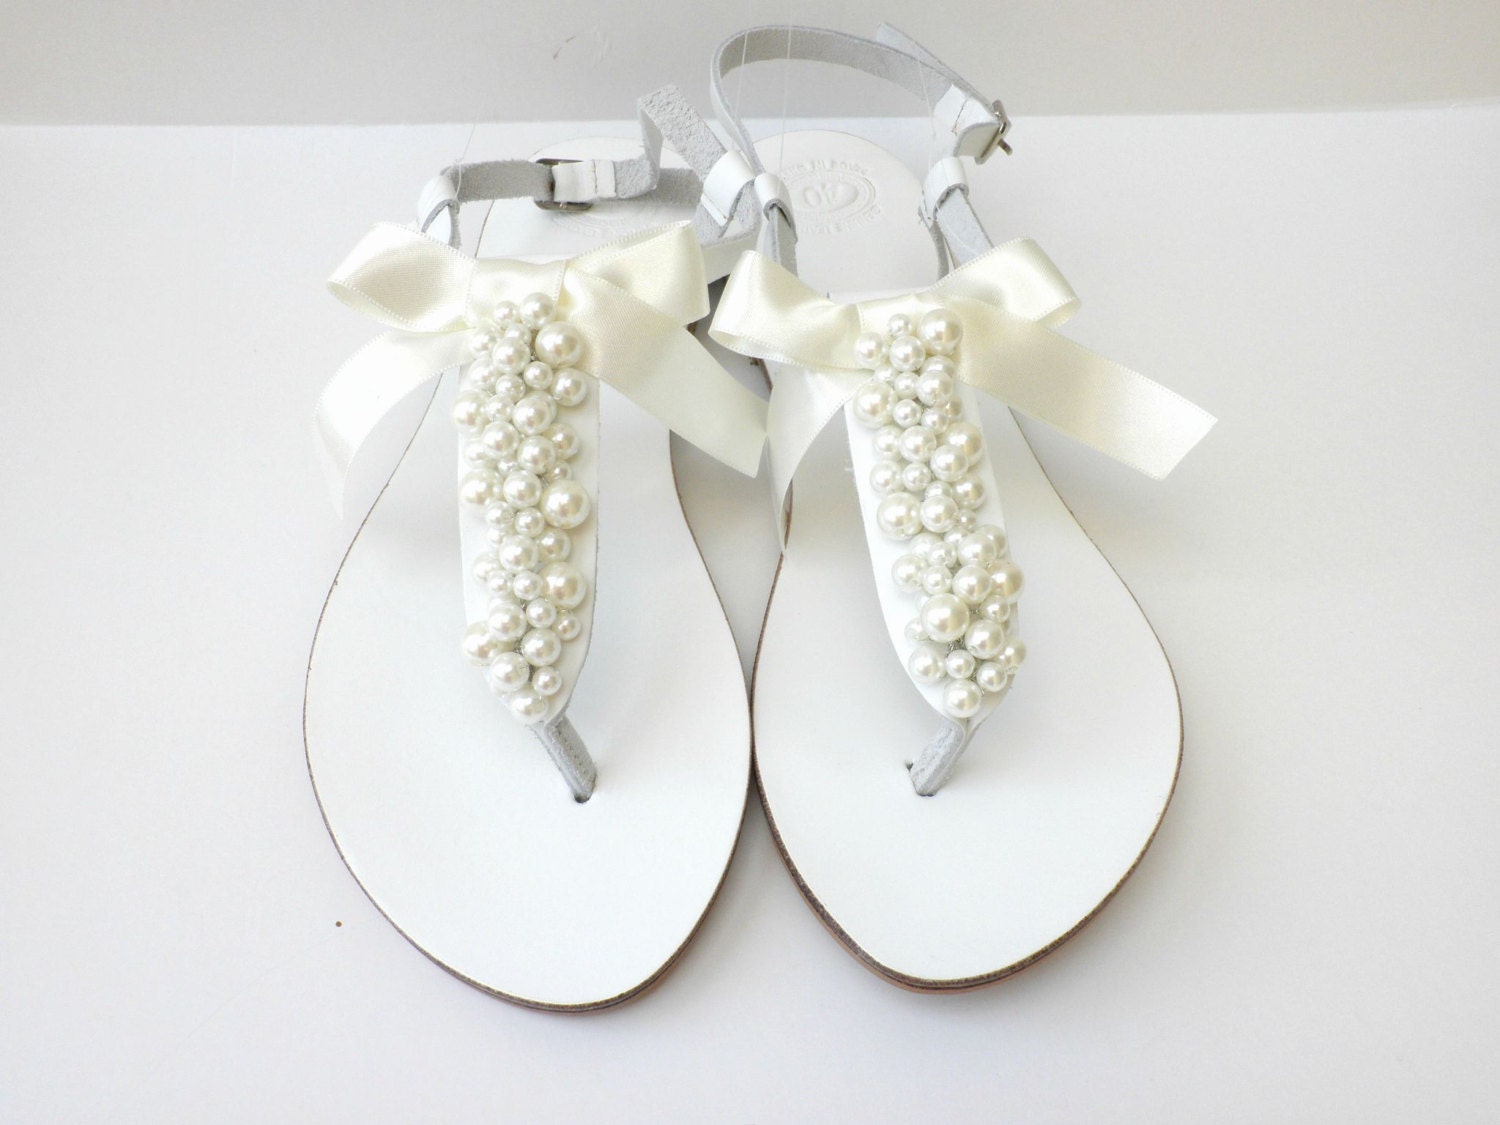 Wedding sandals/ White sandals decorated with ivory pearls/